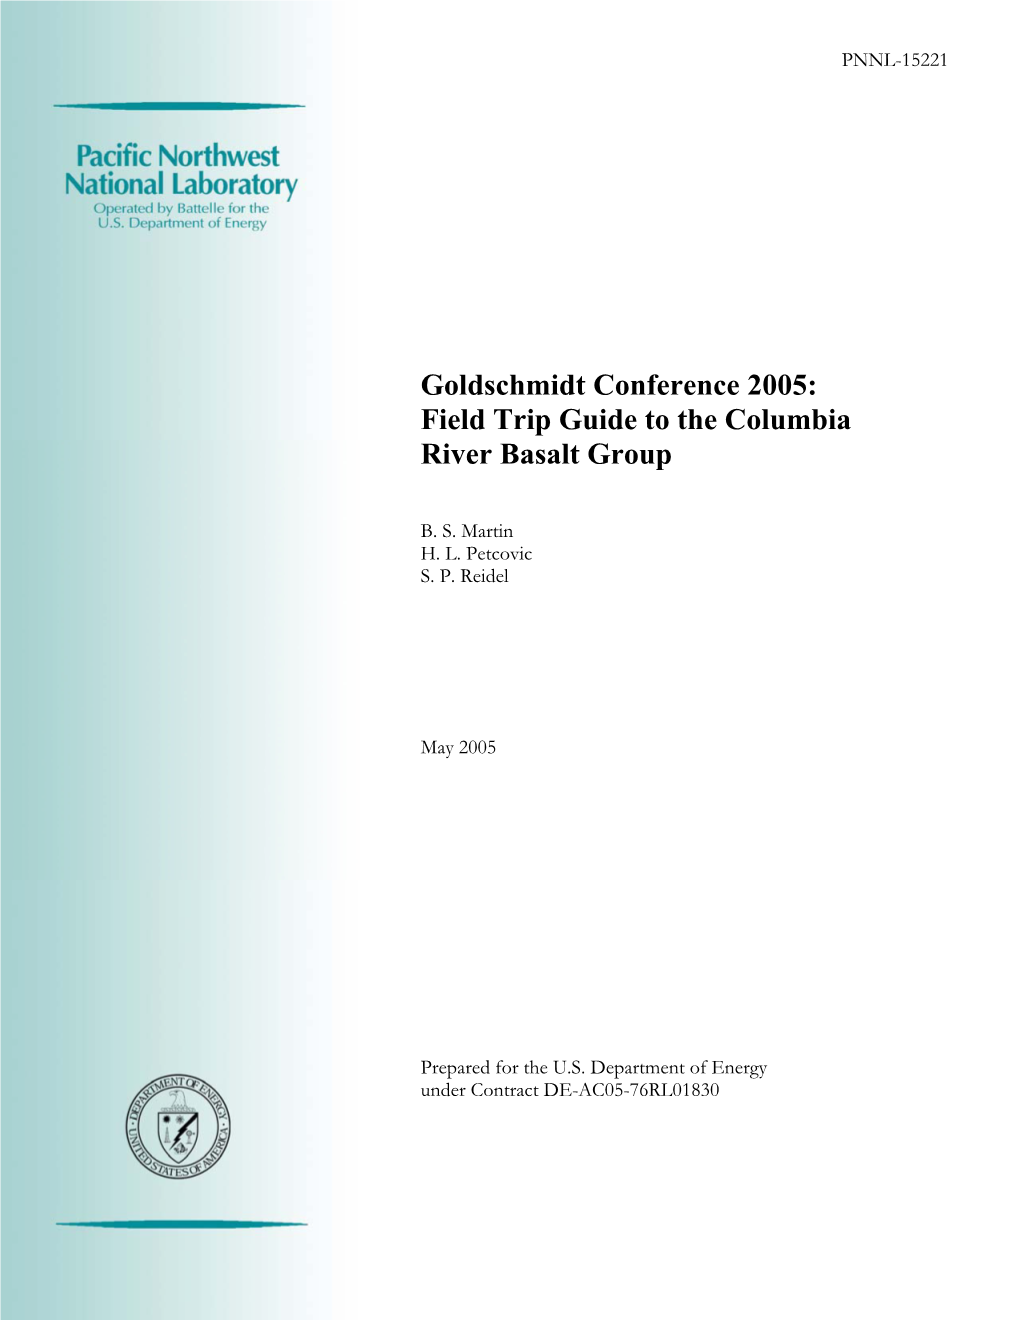 Goldschmidt Conference 2005:Field Trip Guide to the Columbiariver